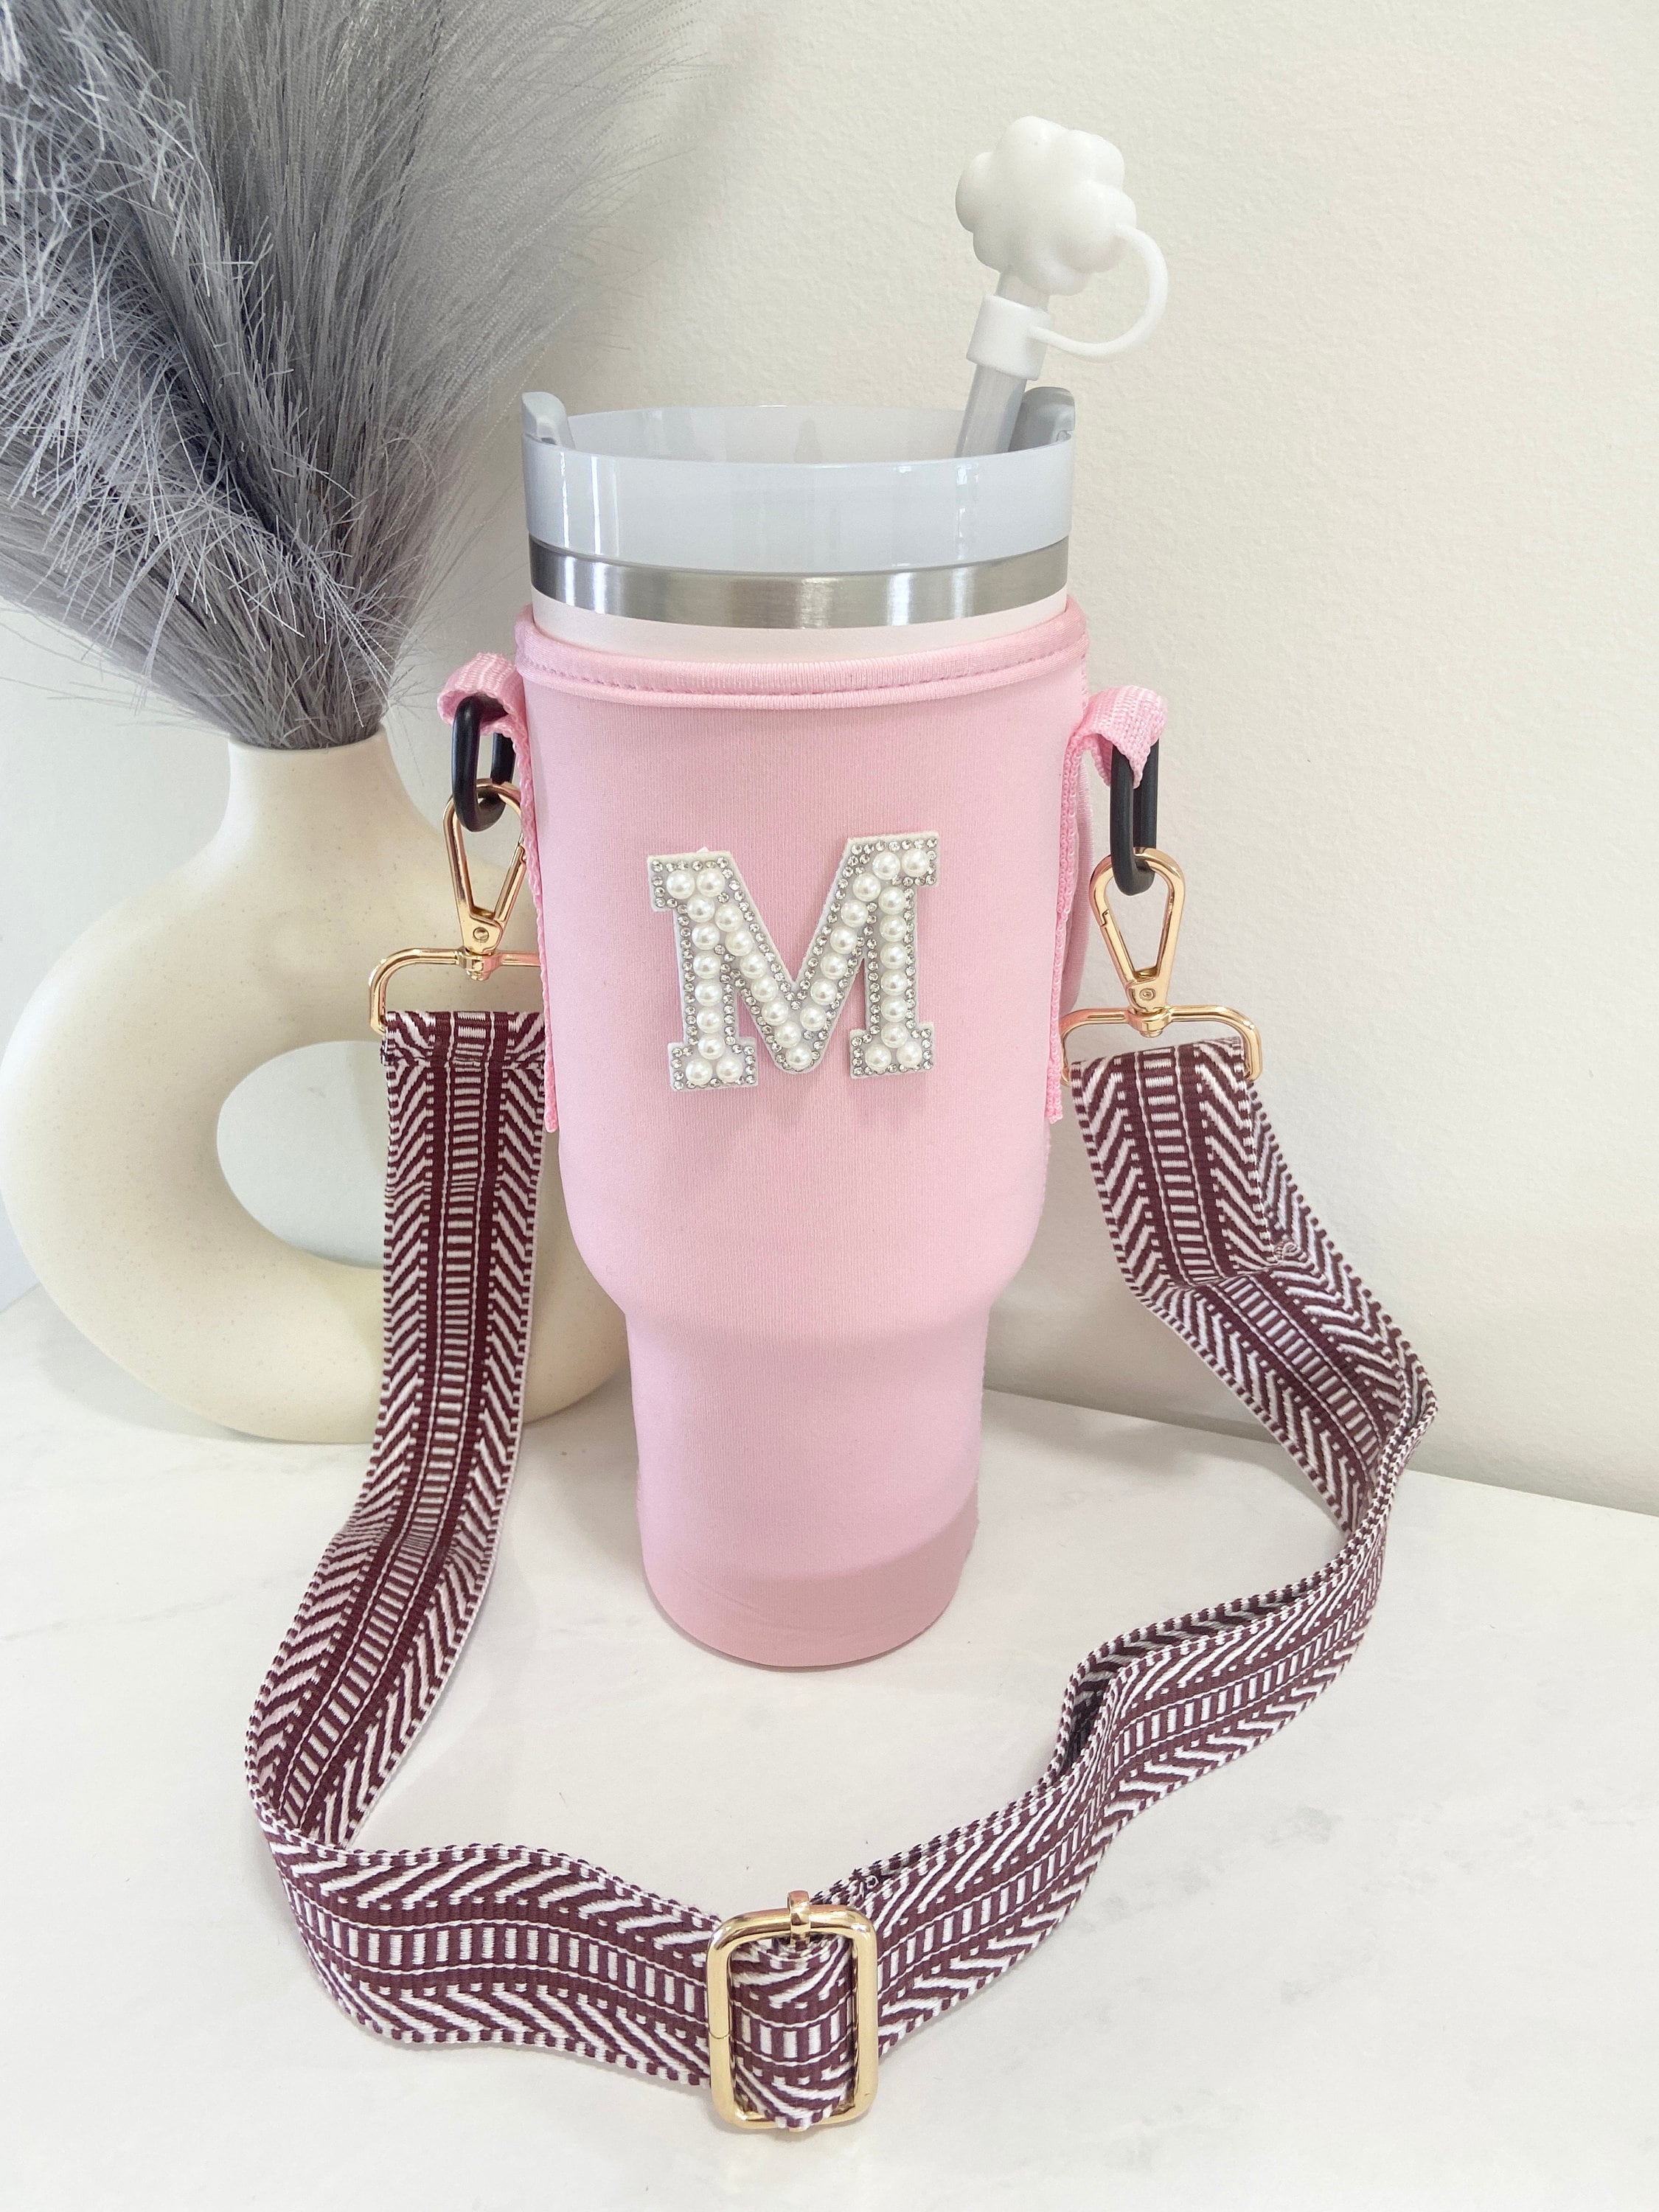 Stanley Tumbler Charm Stanley Accessory Water Bottle Charm Cup Charm  Stanley Cup Charm Tumbler Charm Accessory Stanley Keychain Cup Bracelet 